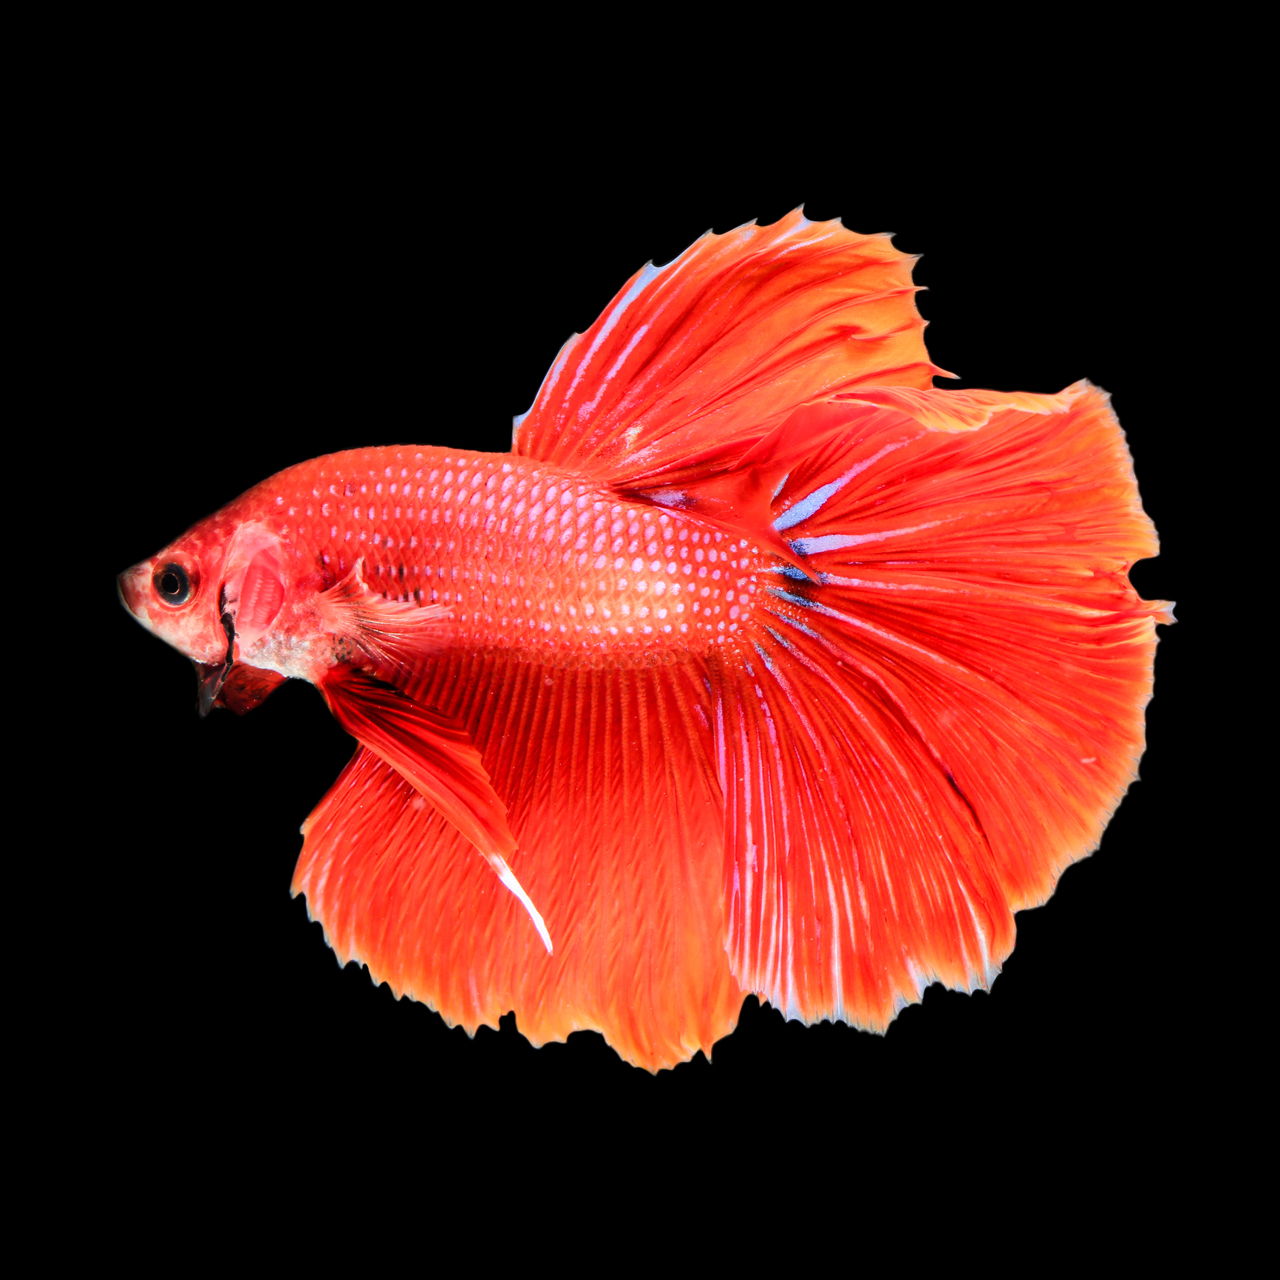 We Suggest Adorable Names for Your Delicate Darling Betta Fish